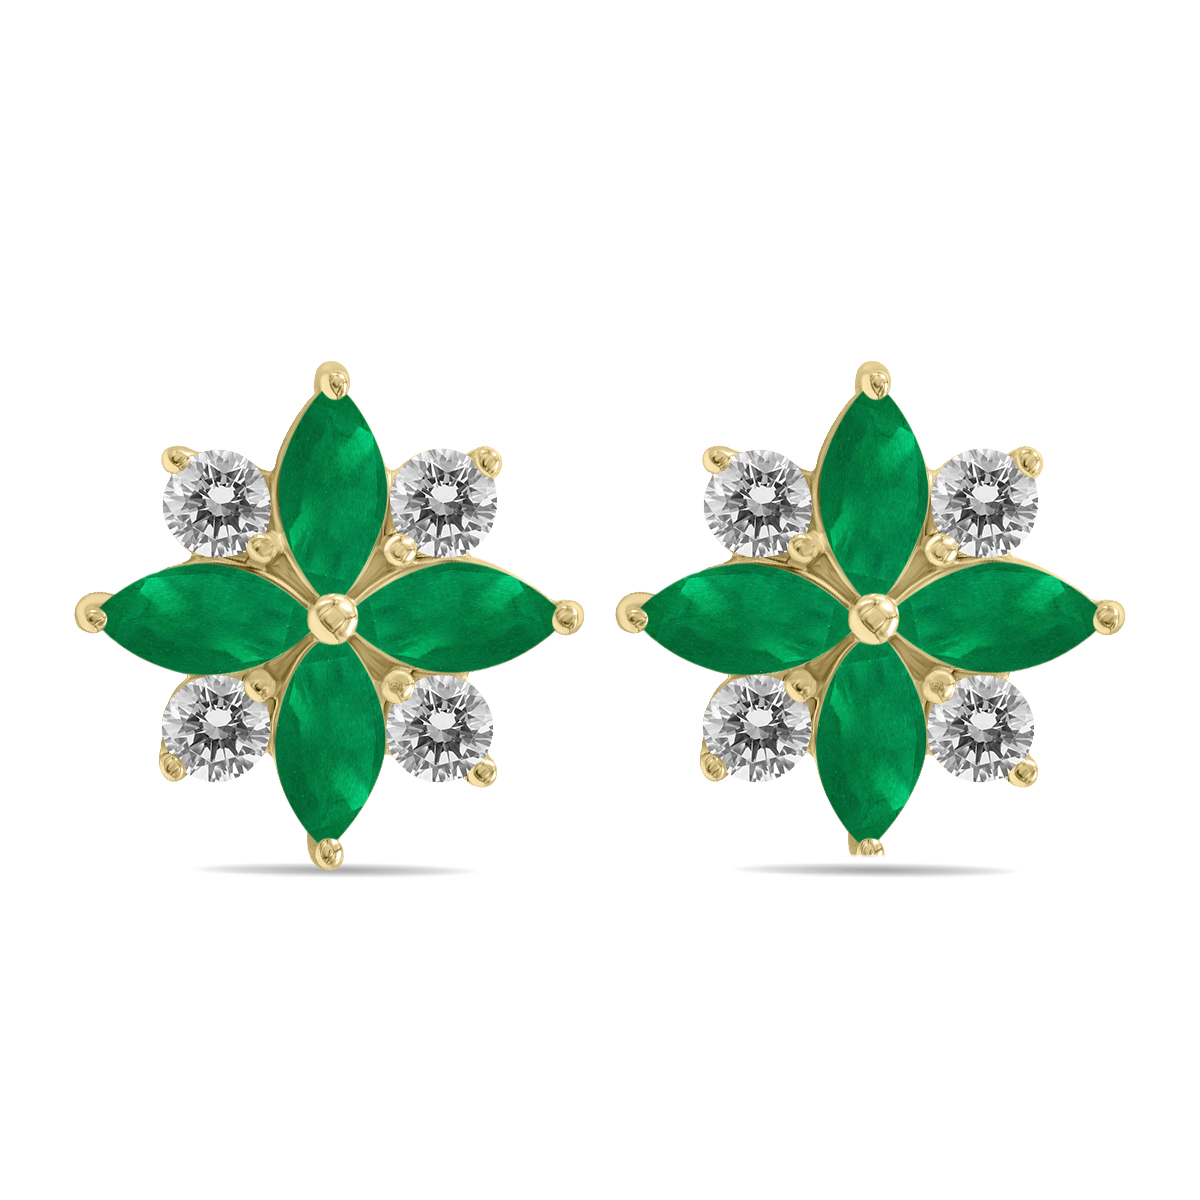 Image of 1 Carat TW Emerald and Diamond Flower Earrings in 10K Yellow Gold